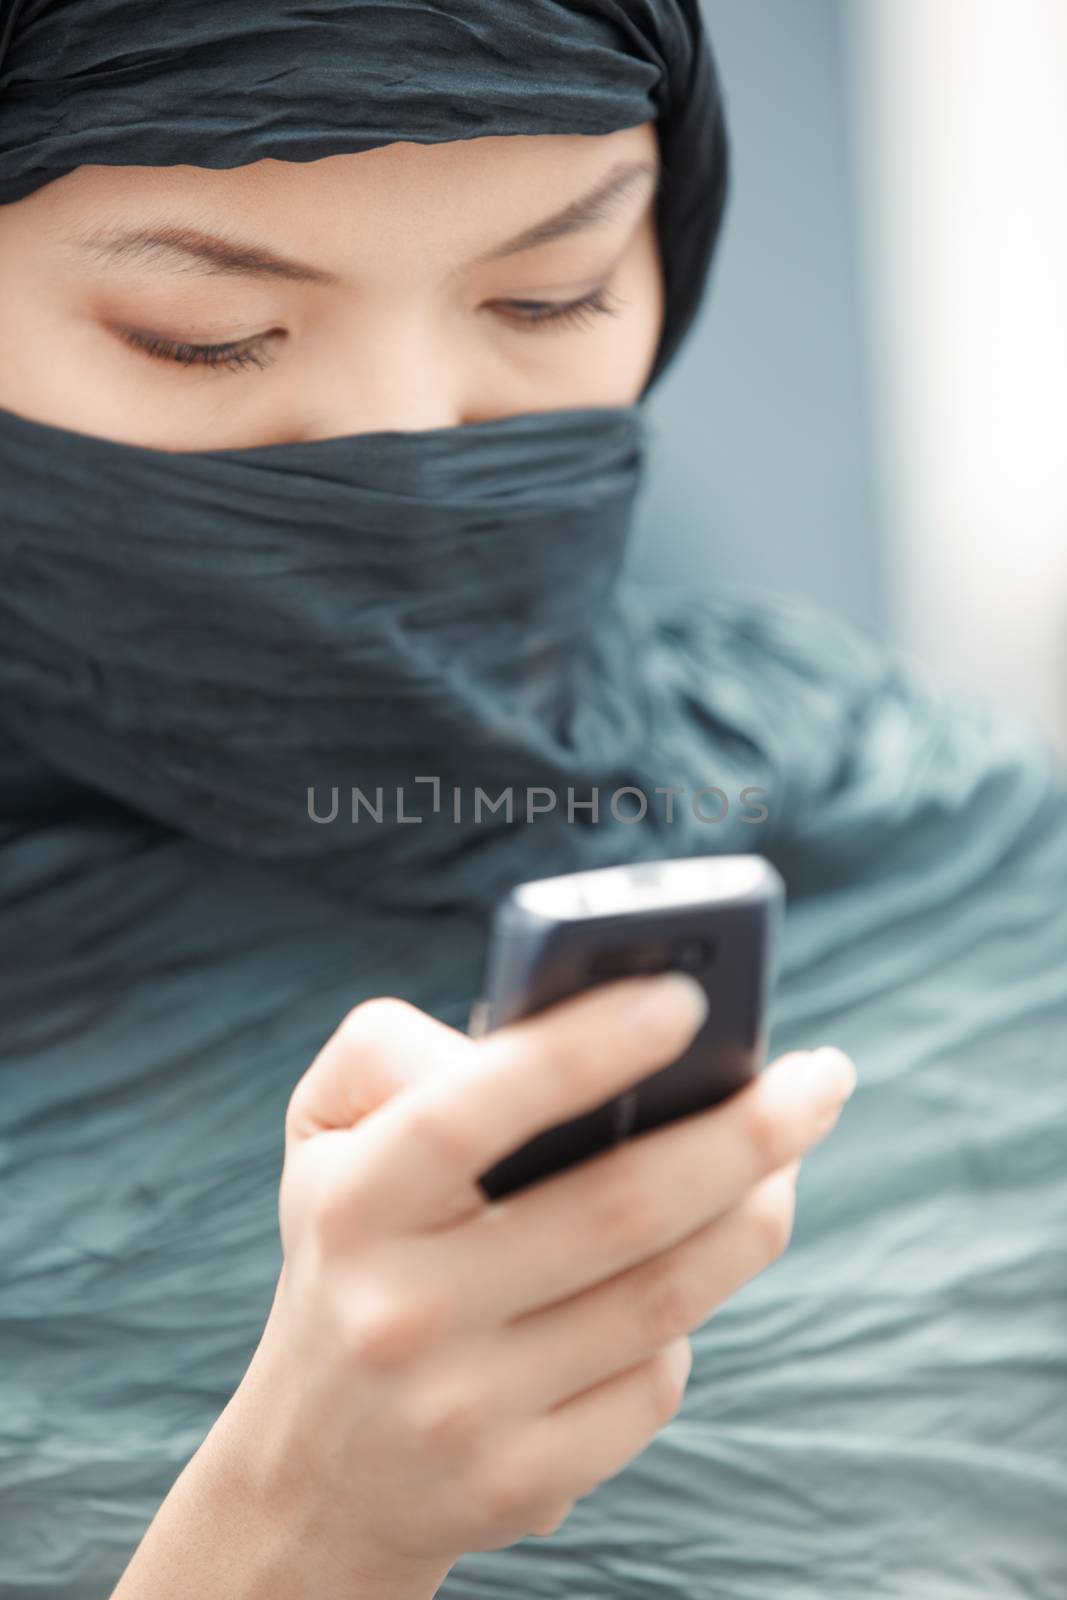 Oriental lady in hijab sending SMS via cell phone